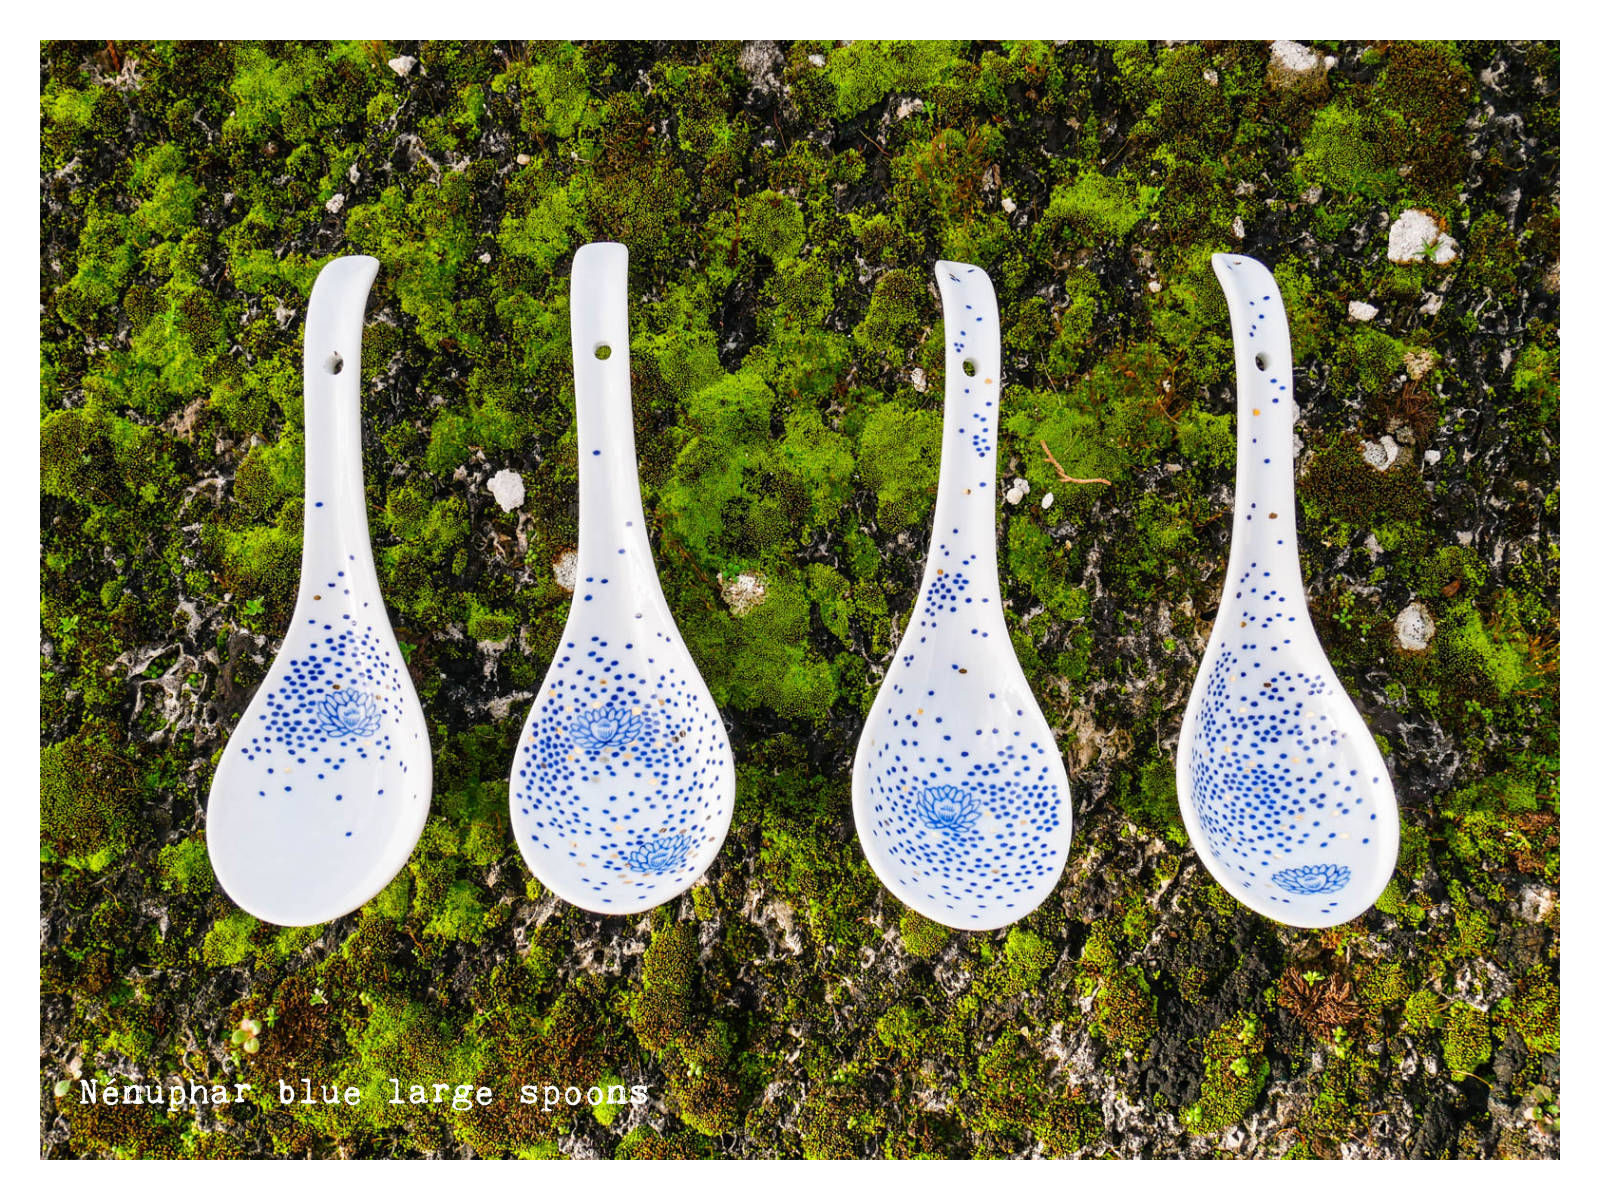 “Nénuphar” blue spoons (large) from “Enchanteresse”, a collection of painted porcelains by messalyn.